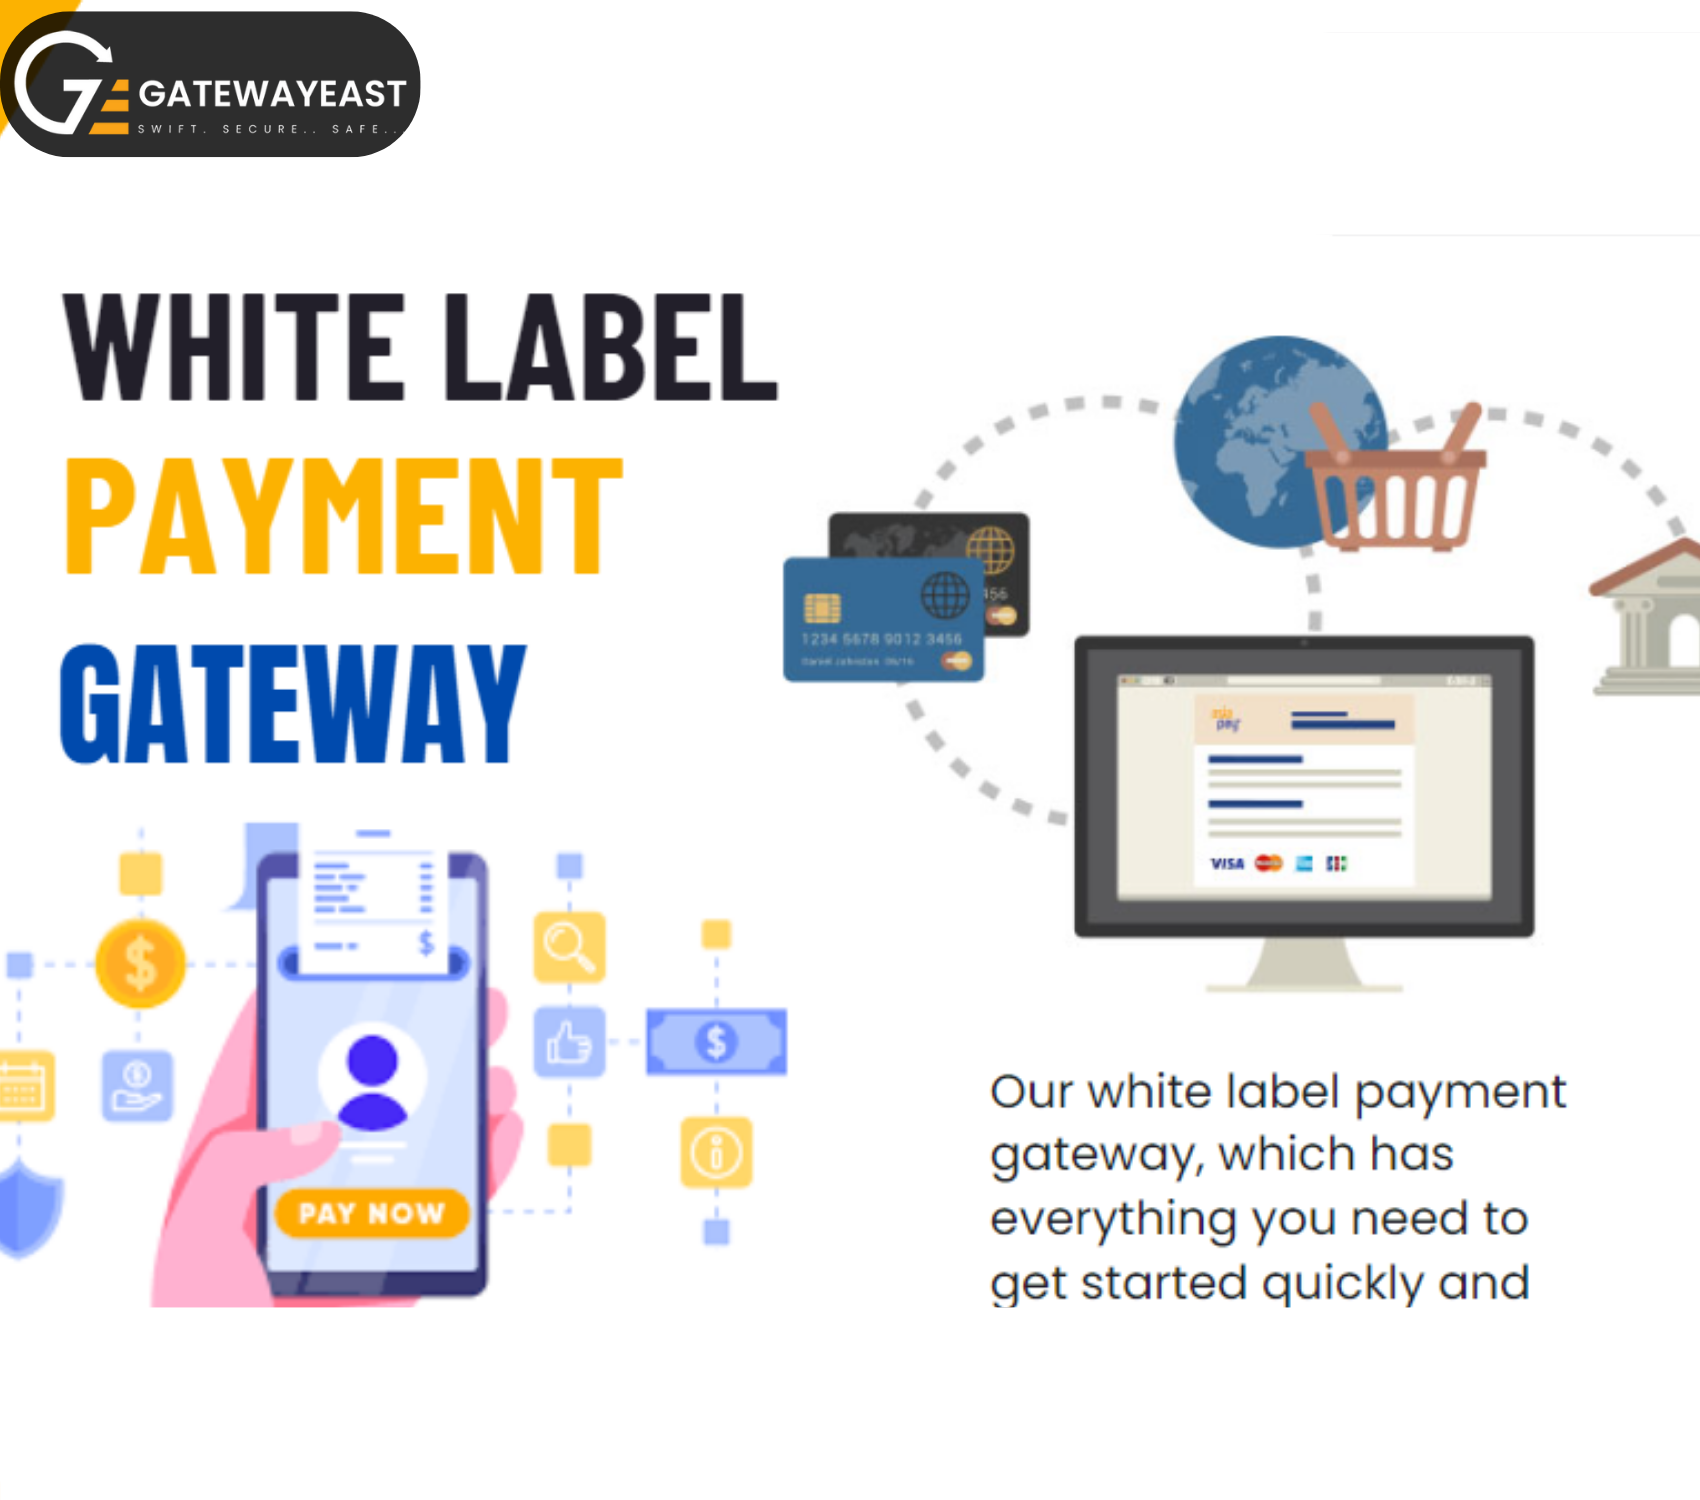 How to Start a White Label Payment Gateway Business - JustPaste.it